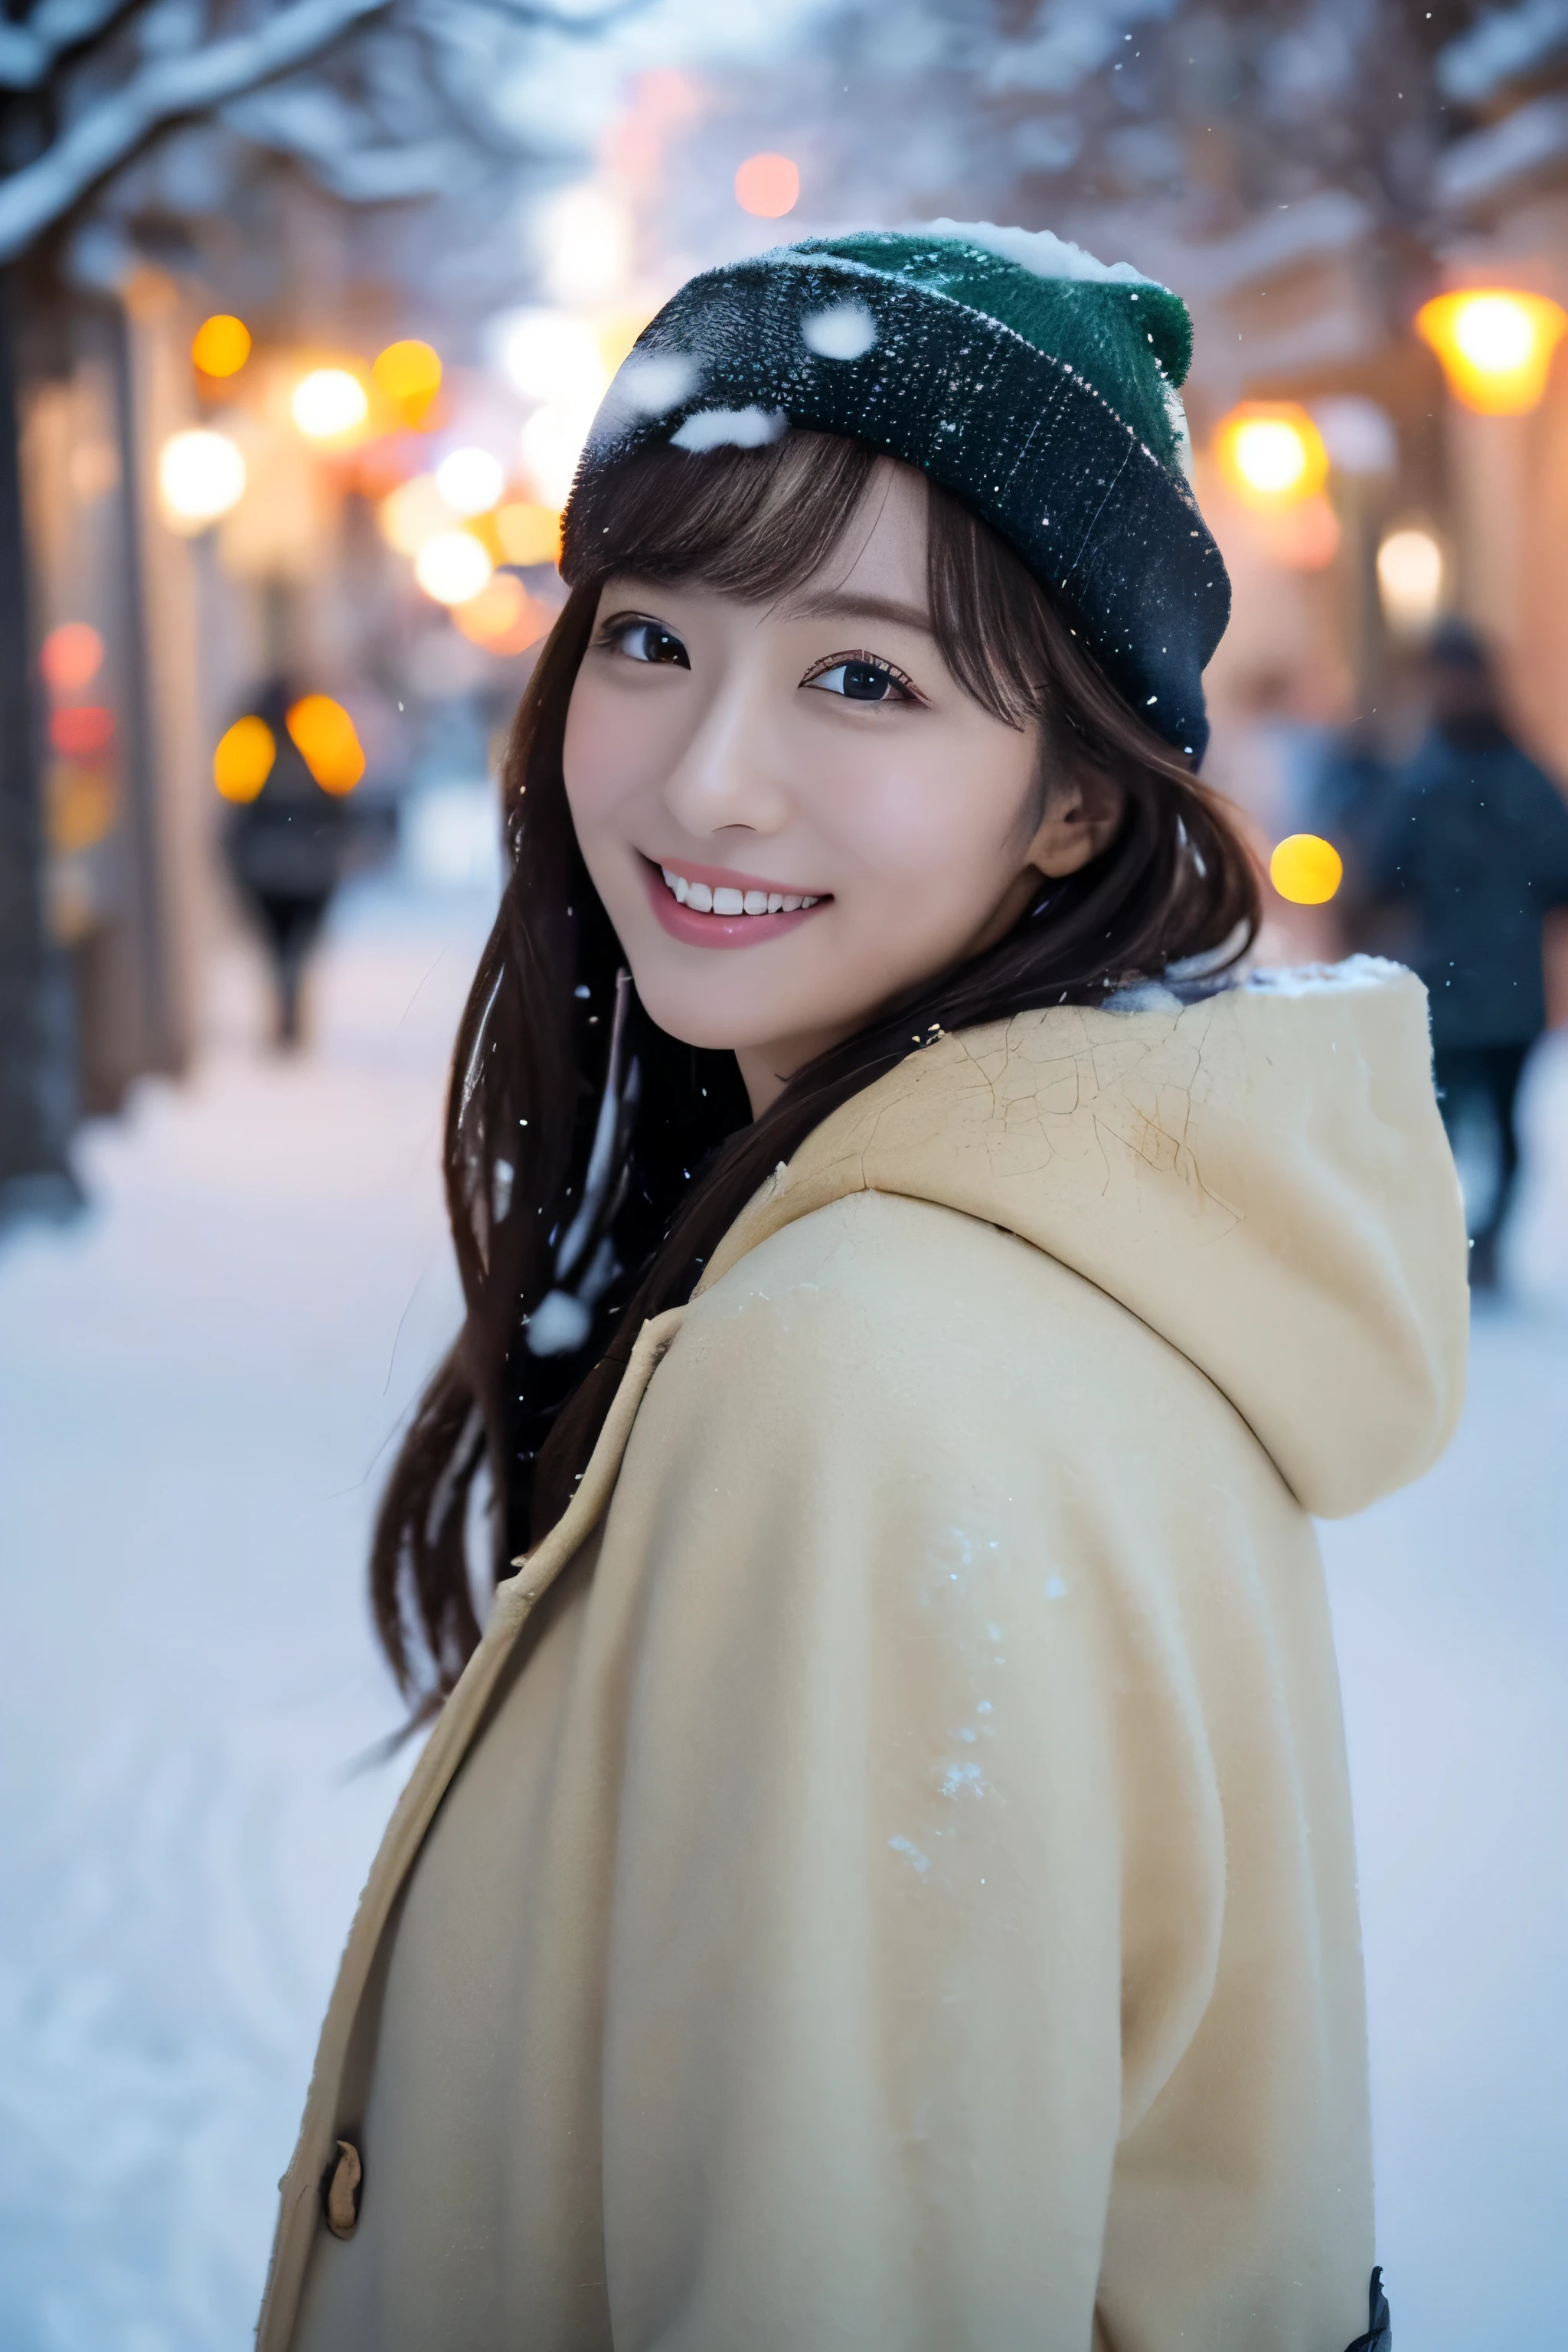 1girl in, (Beige coat, Green muffler:1.2), (Raw photo, Best Quality), (Realistic, Photorealsitic:1.4), masutepiece, Extremely delicate and beautiful, Extremely detailed, 2k wallpaper, amazing, finely detail, the Extremely Detailed CG Unity 8K Wallpapers, Ultra-detailed, hight resolution, Soft light, Beautiful detailed girl, extremely detailed eye and face, beautiful detailed nose, Beautiful detailed eyes, Cinematic lighting, Illuminations coloring the city on a snowy night, (Illumination of street trees covered with snow like frost-covered trees:1.4), Snowy landscape, It's snowing, snow fell in my hair, Diffuse reflection of light, α80mmF1.8, Perfect Anatomy, Slender body, Small, Smiling